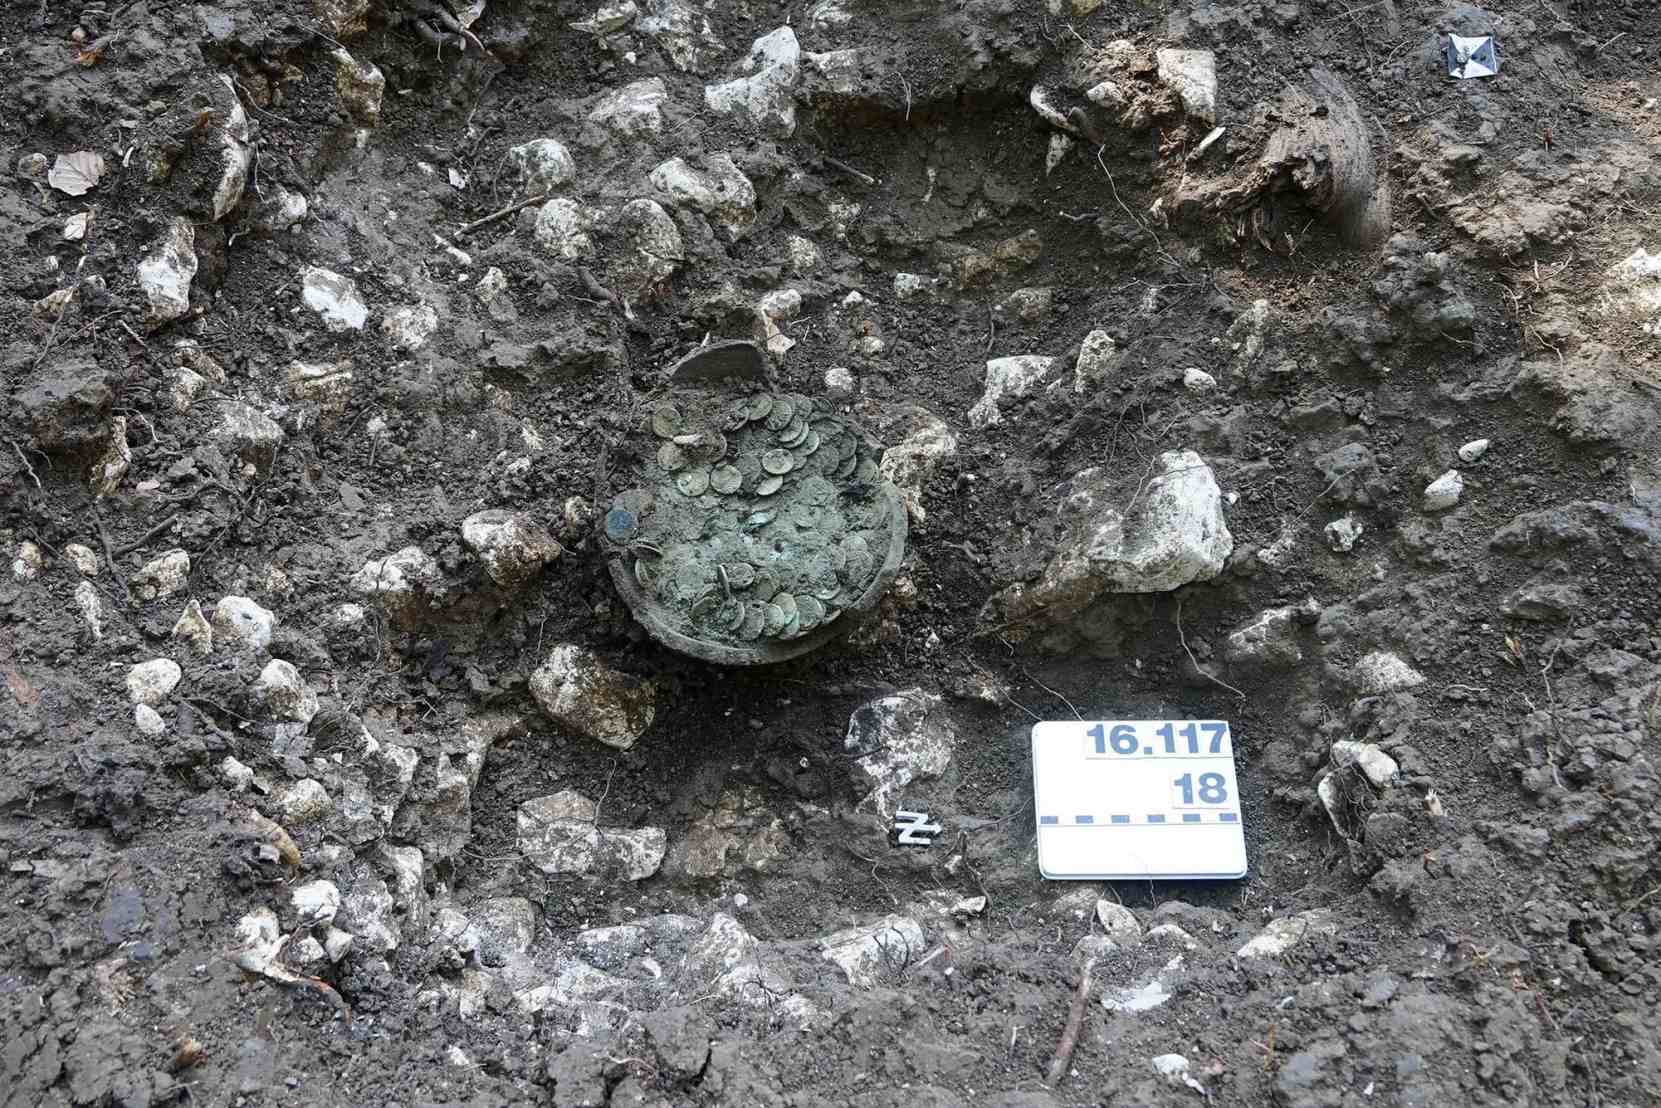 The clay pot contained 1,290 Roman coins